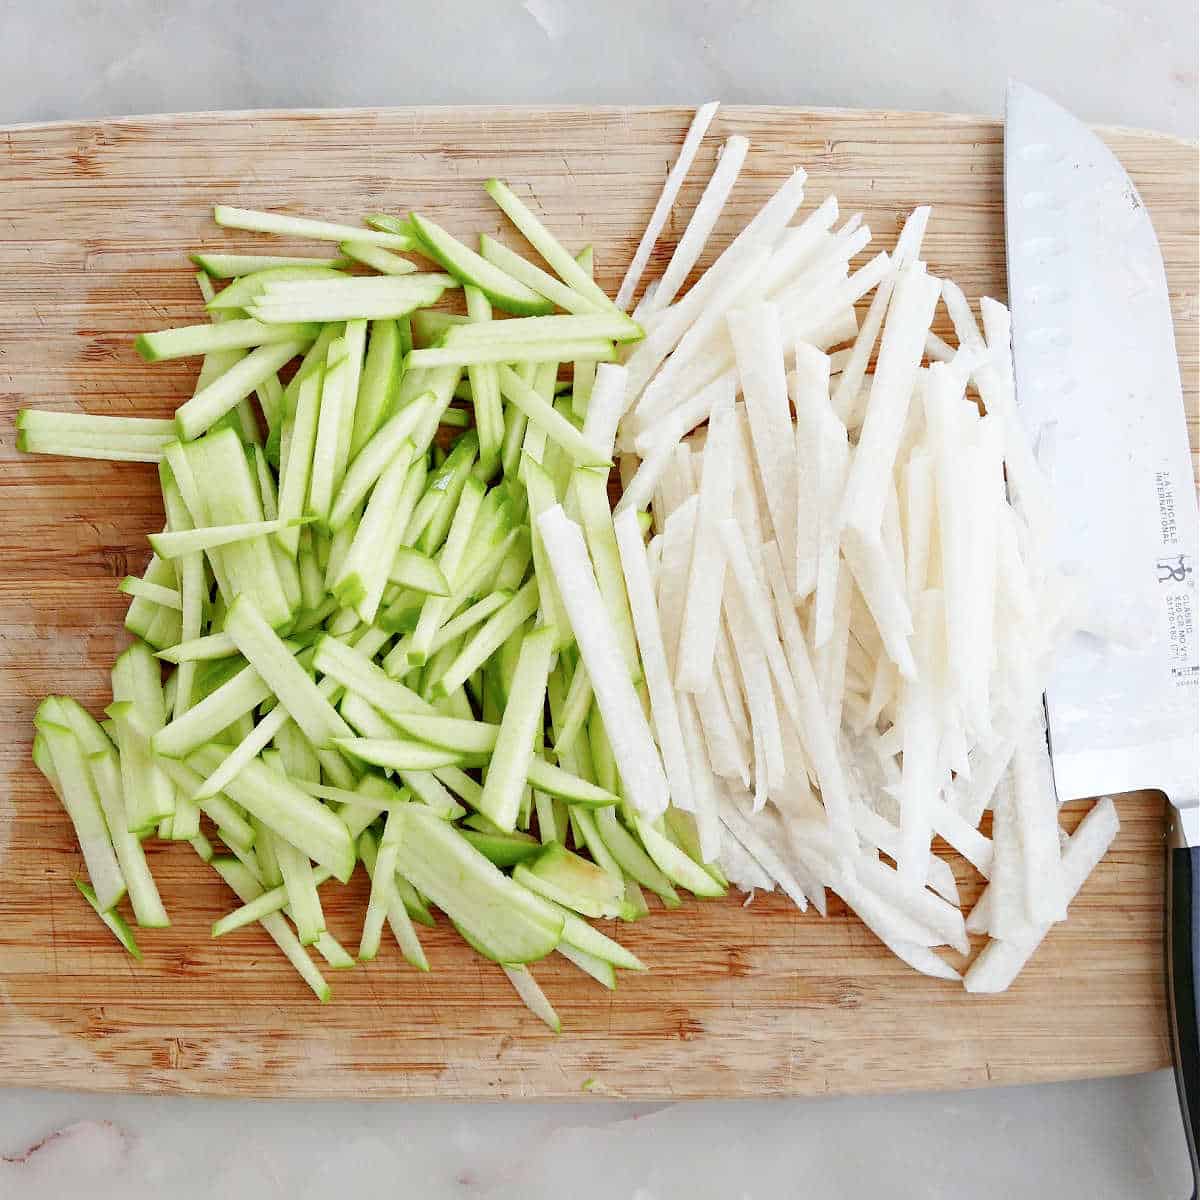 green apples and jicama cut into matchsticks on a cutting board next to a knife